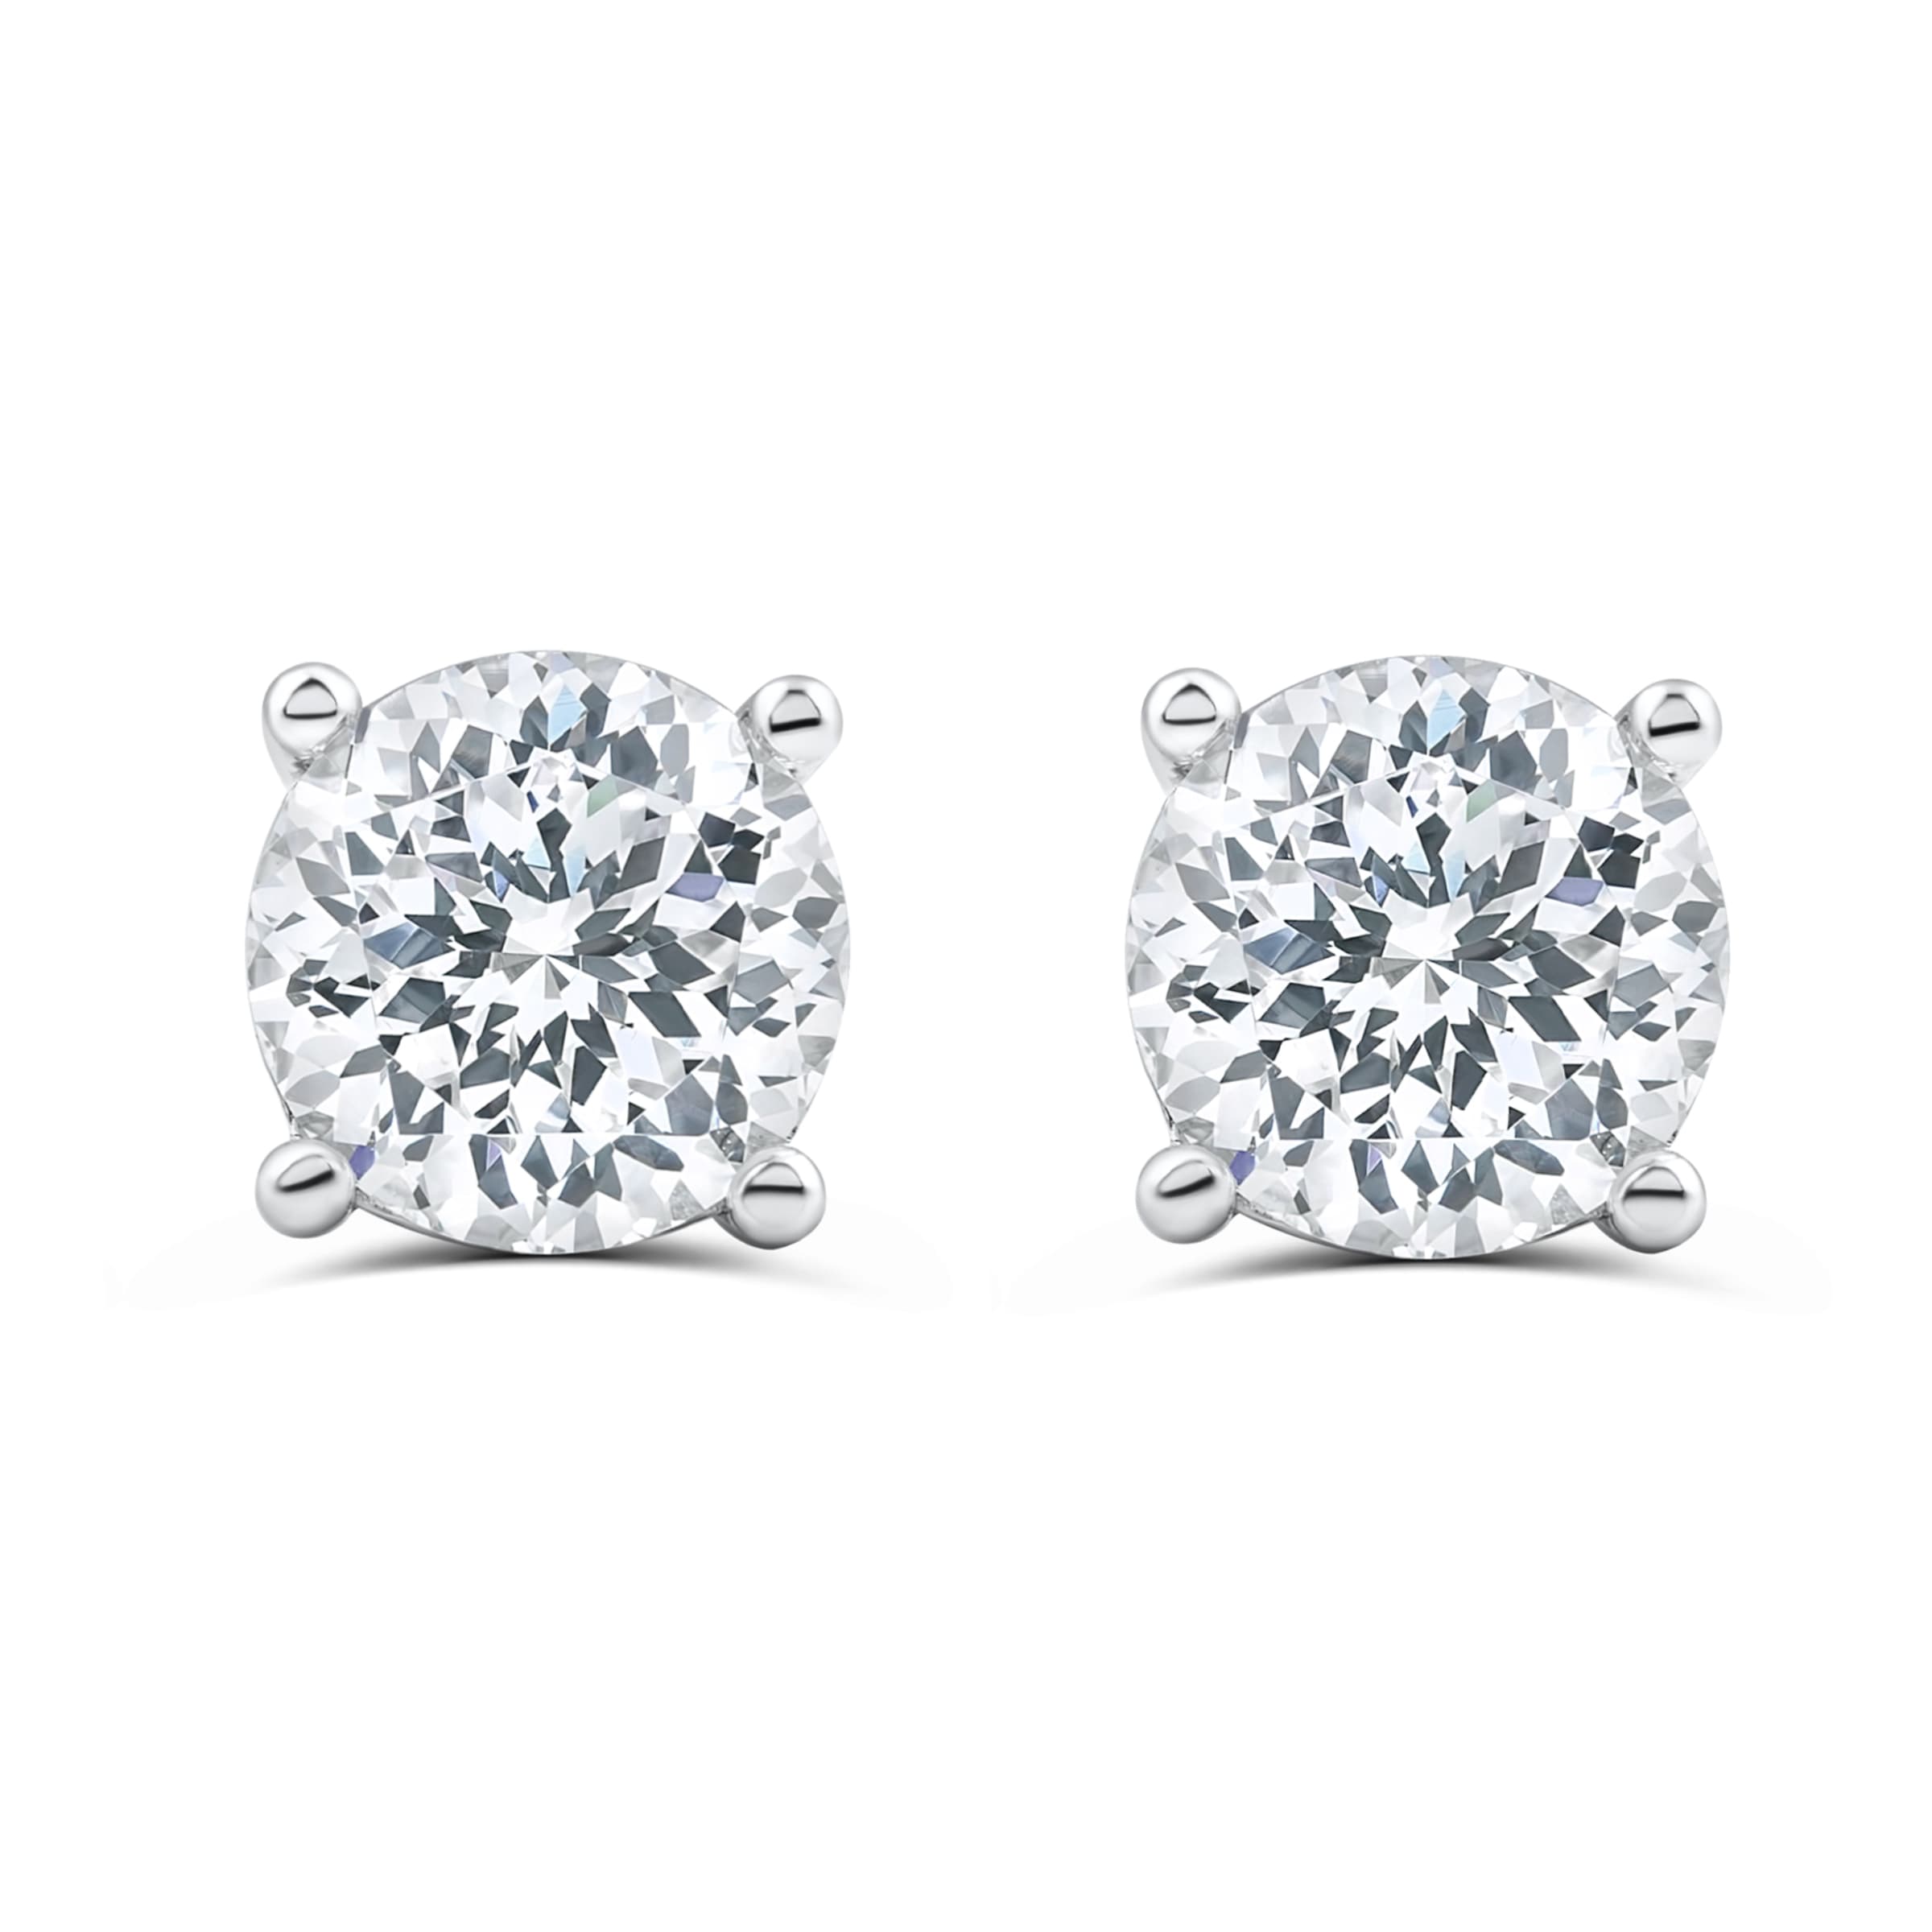 silver stud earrings called the ritz